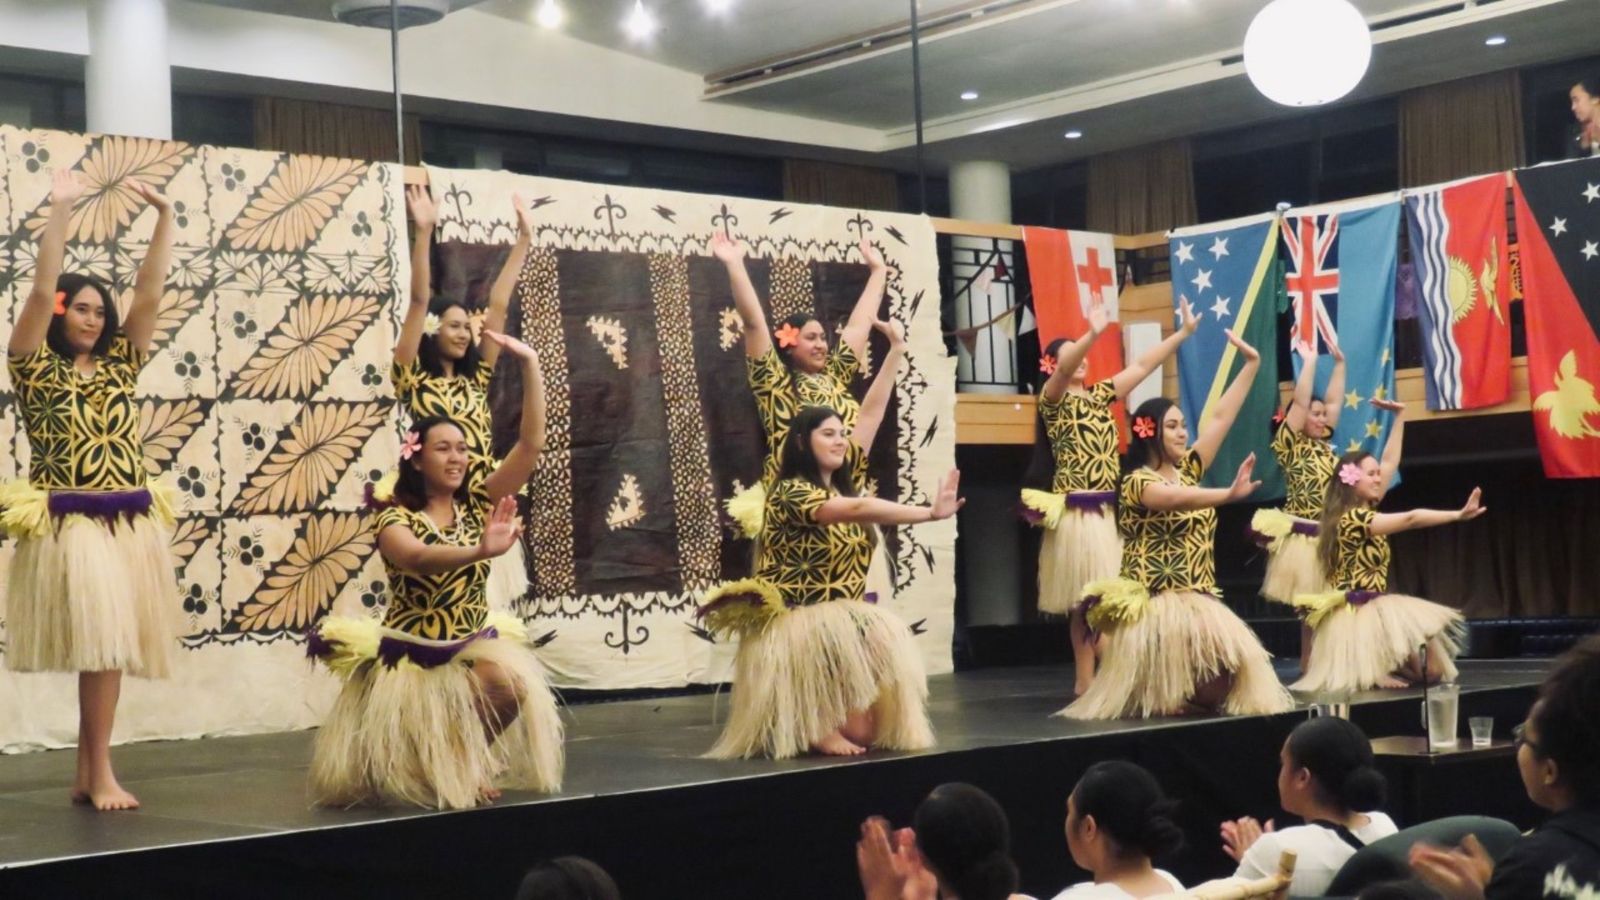 Dance performance on stage with tapa cloth in the background.